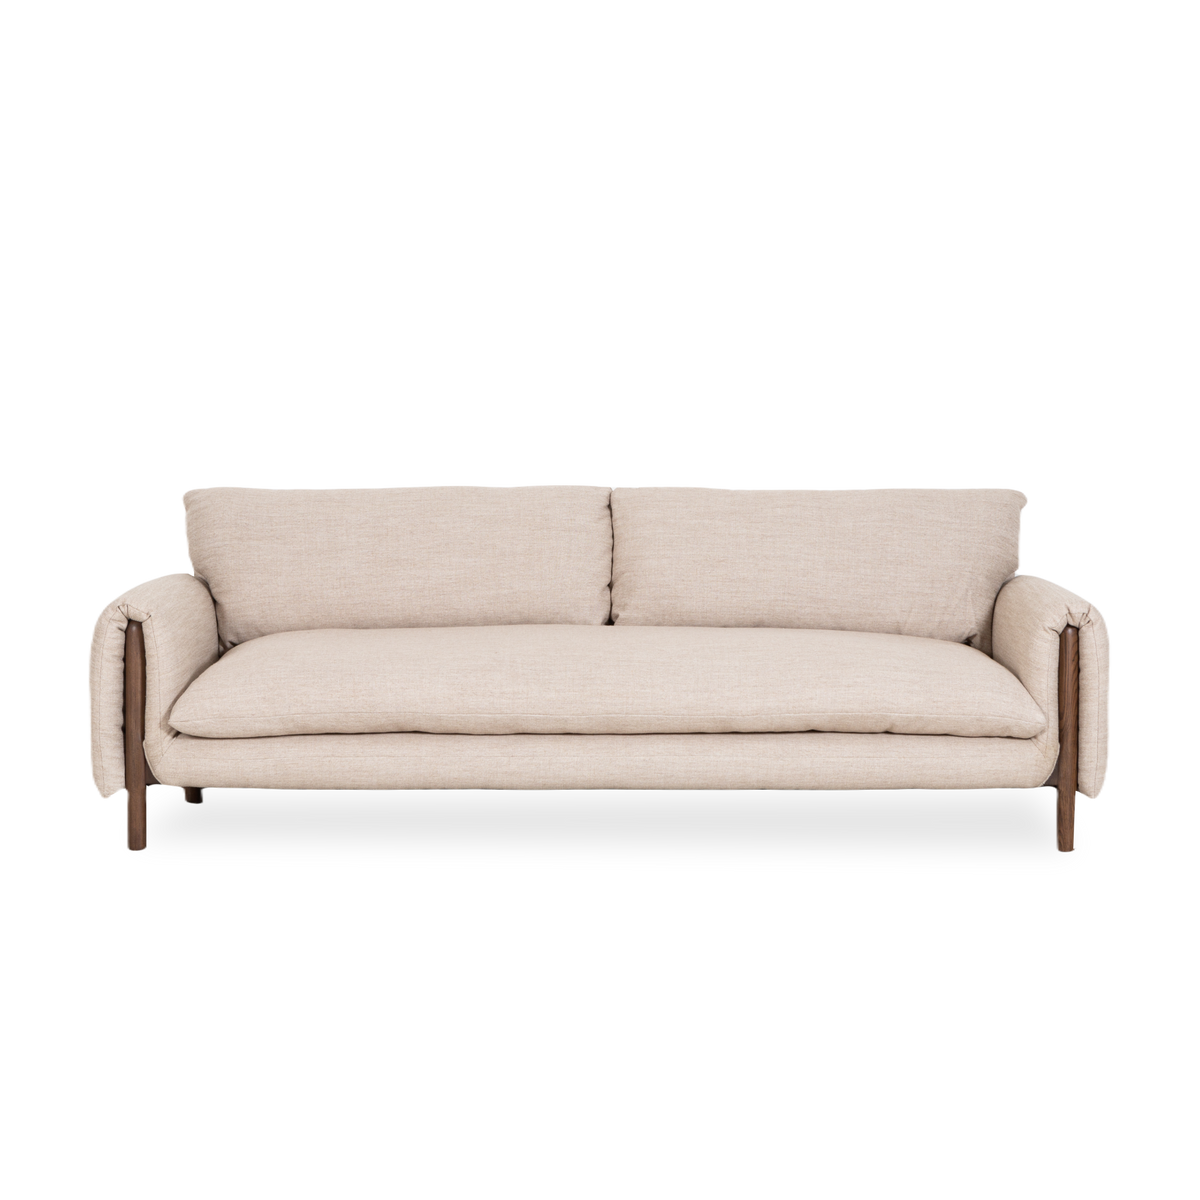 Bringing a casual ease to contemporary styling, the Horizon Sofa is full of subtle texture and soft drama.